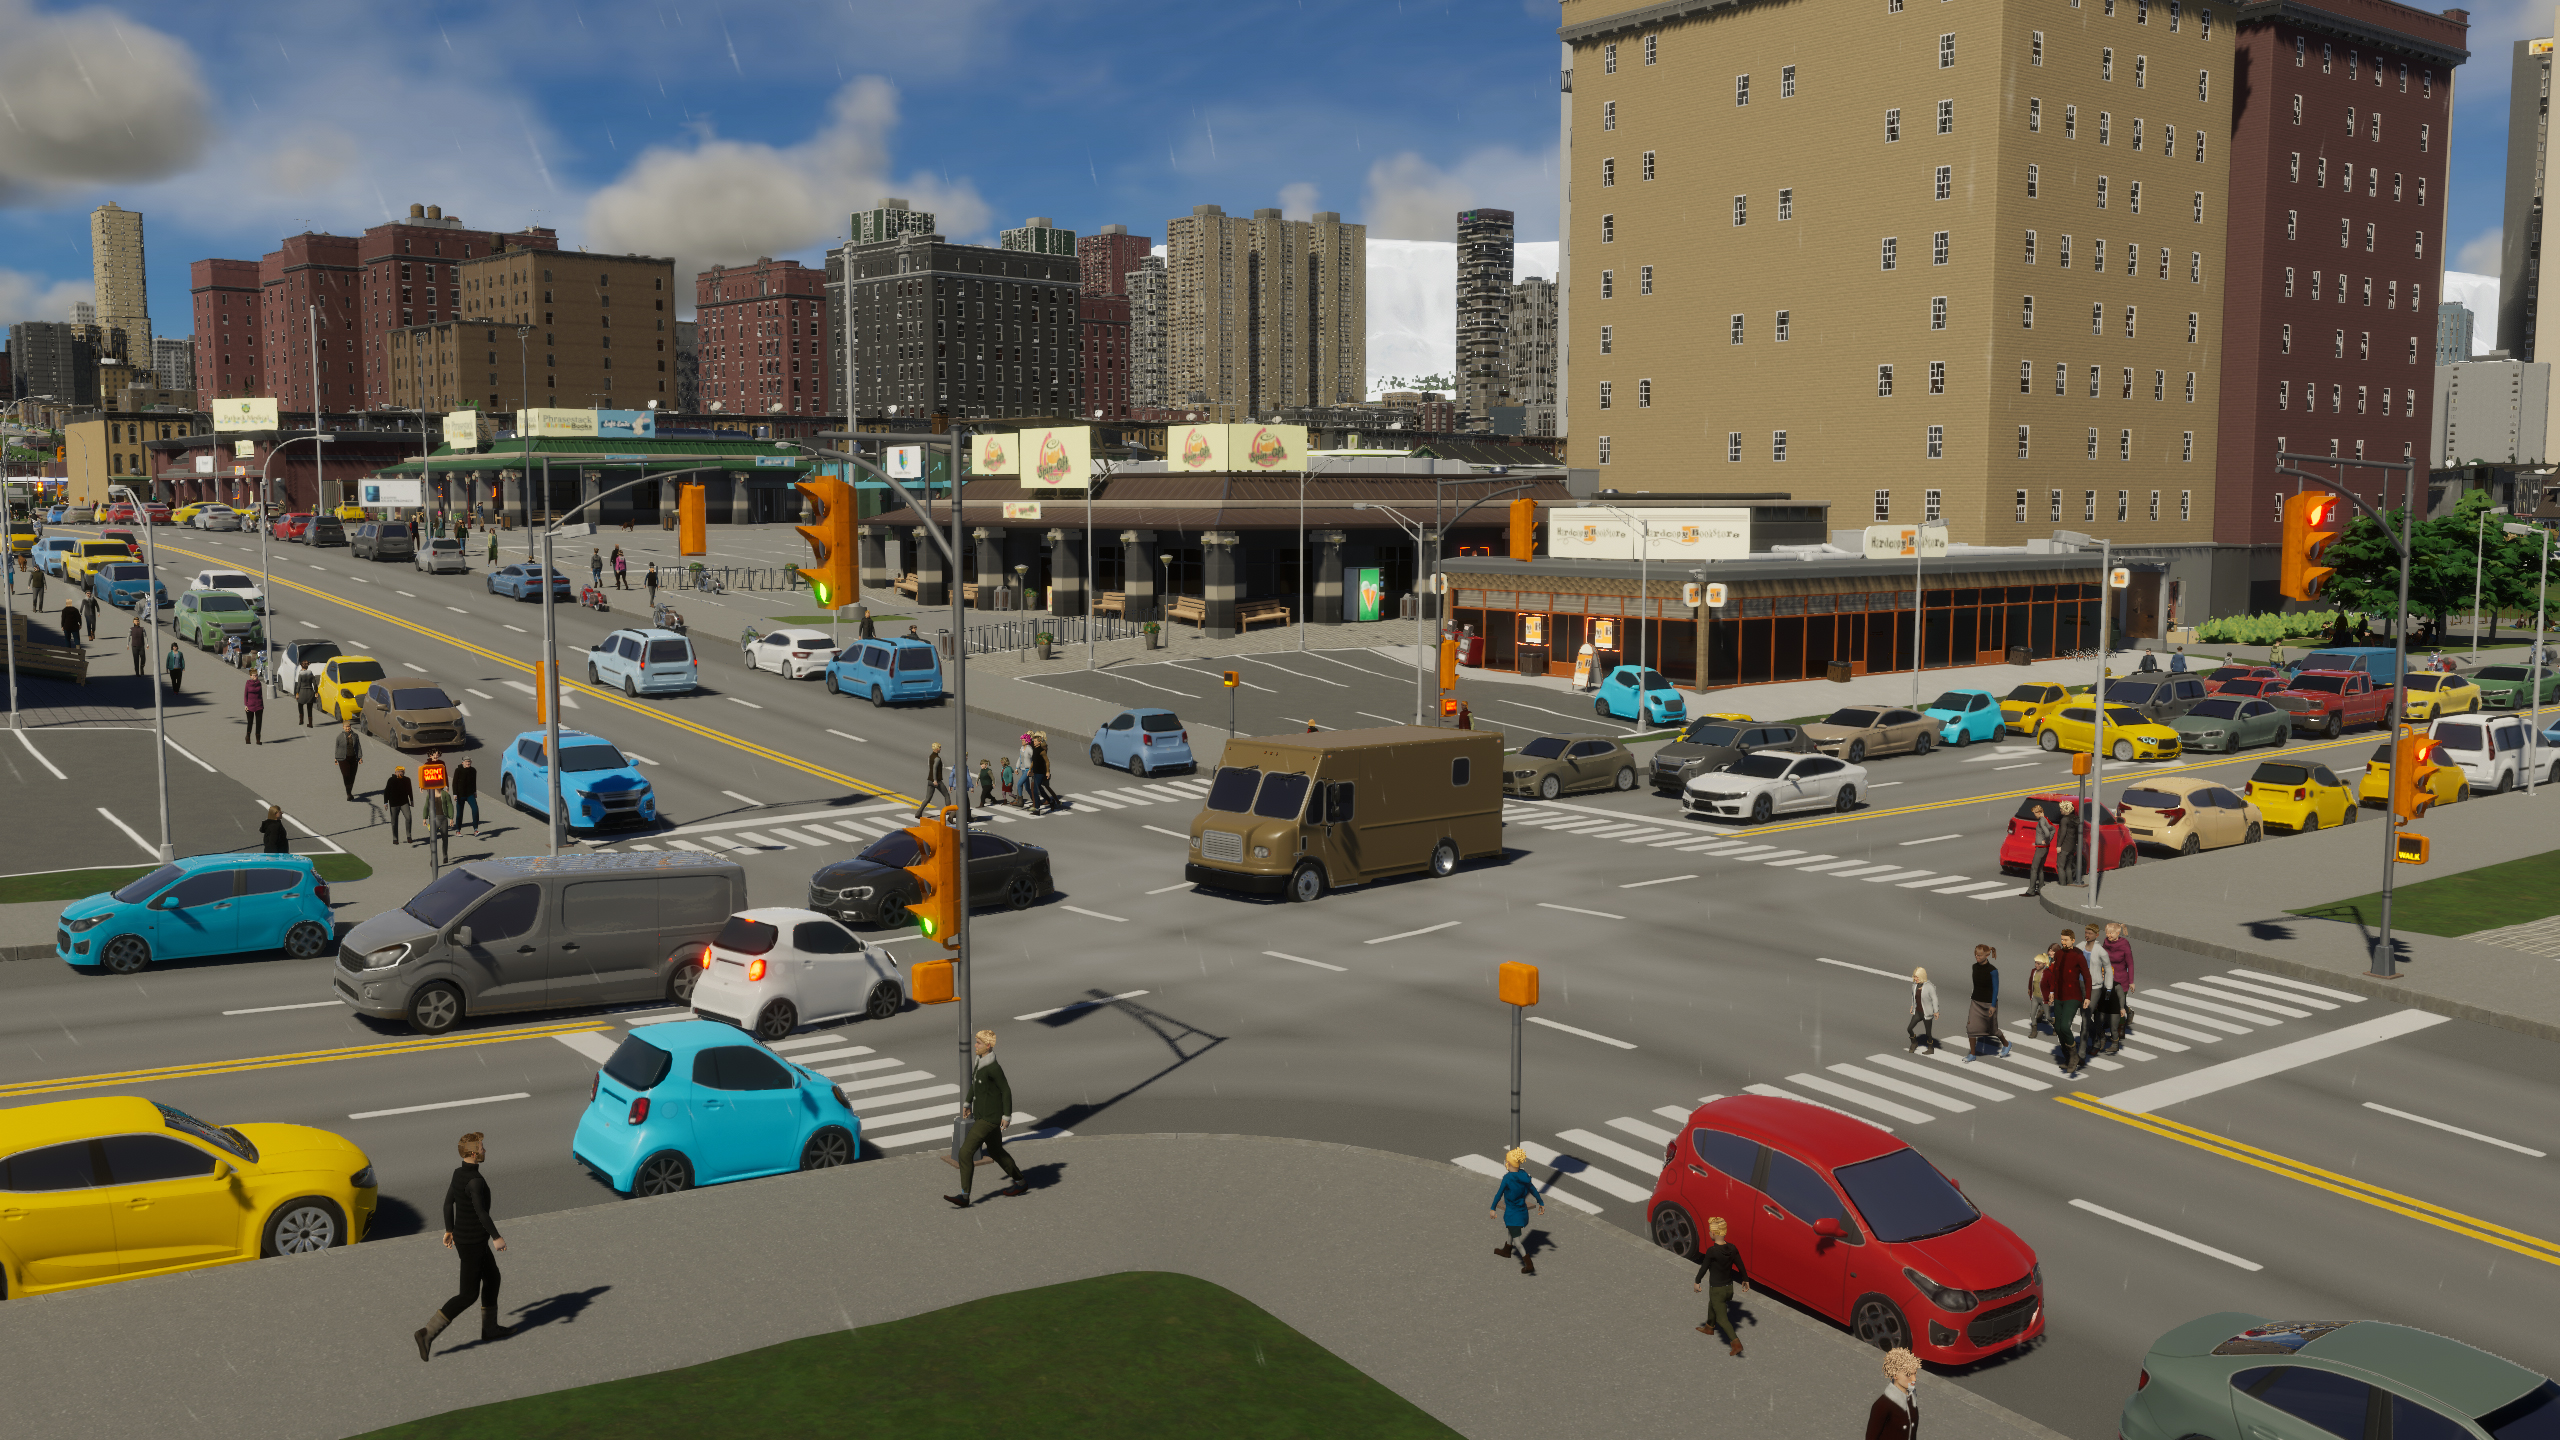 Cities: Skylines 2: Probably no multiplayer and other details - Game News 24